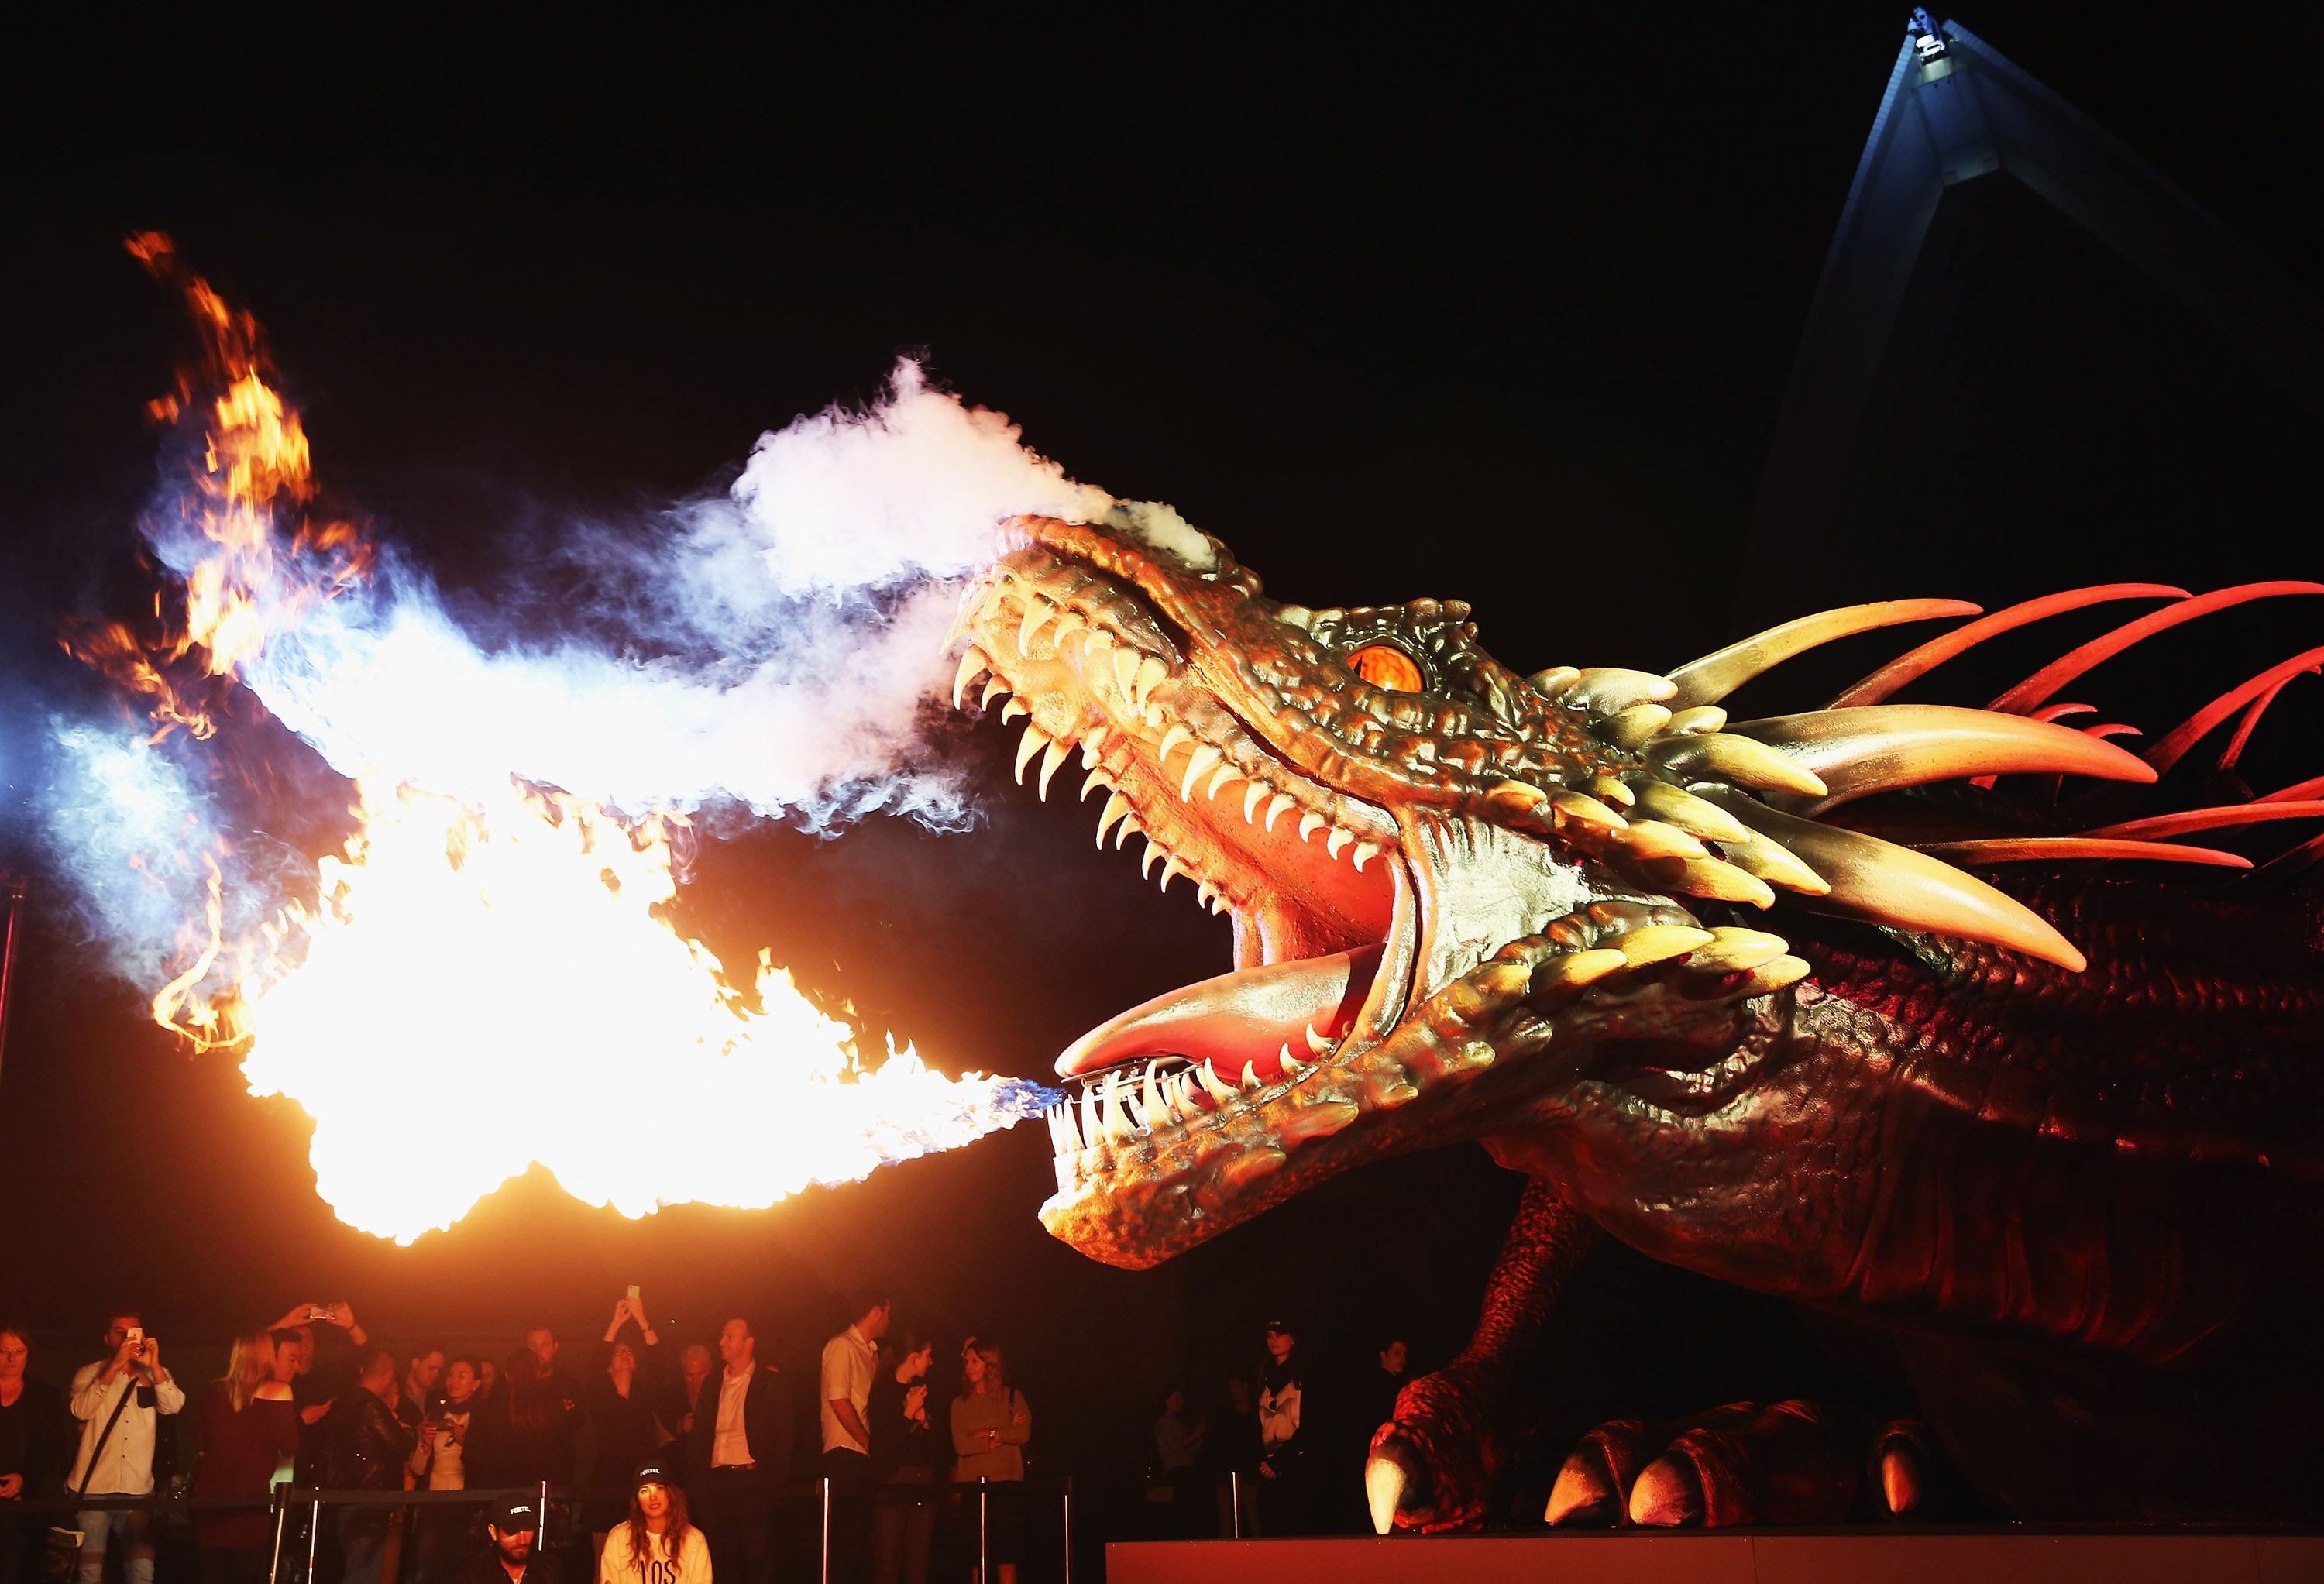 HBO releases highly anticipated ‘House of the Dragon’ trailer